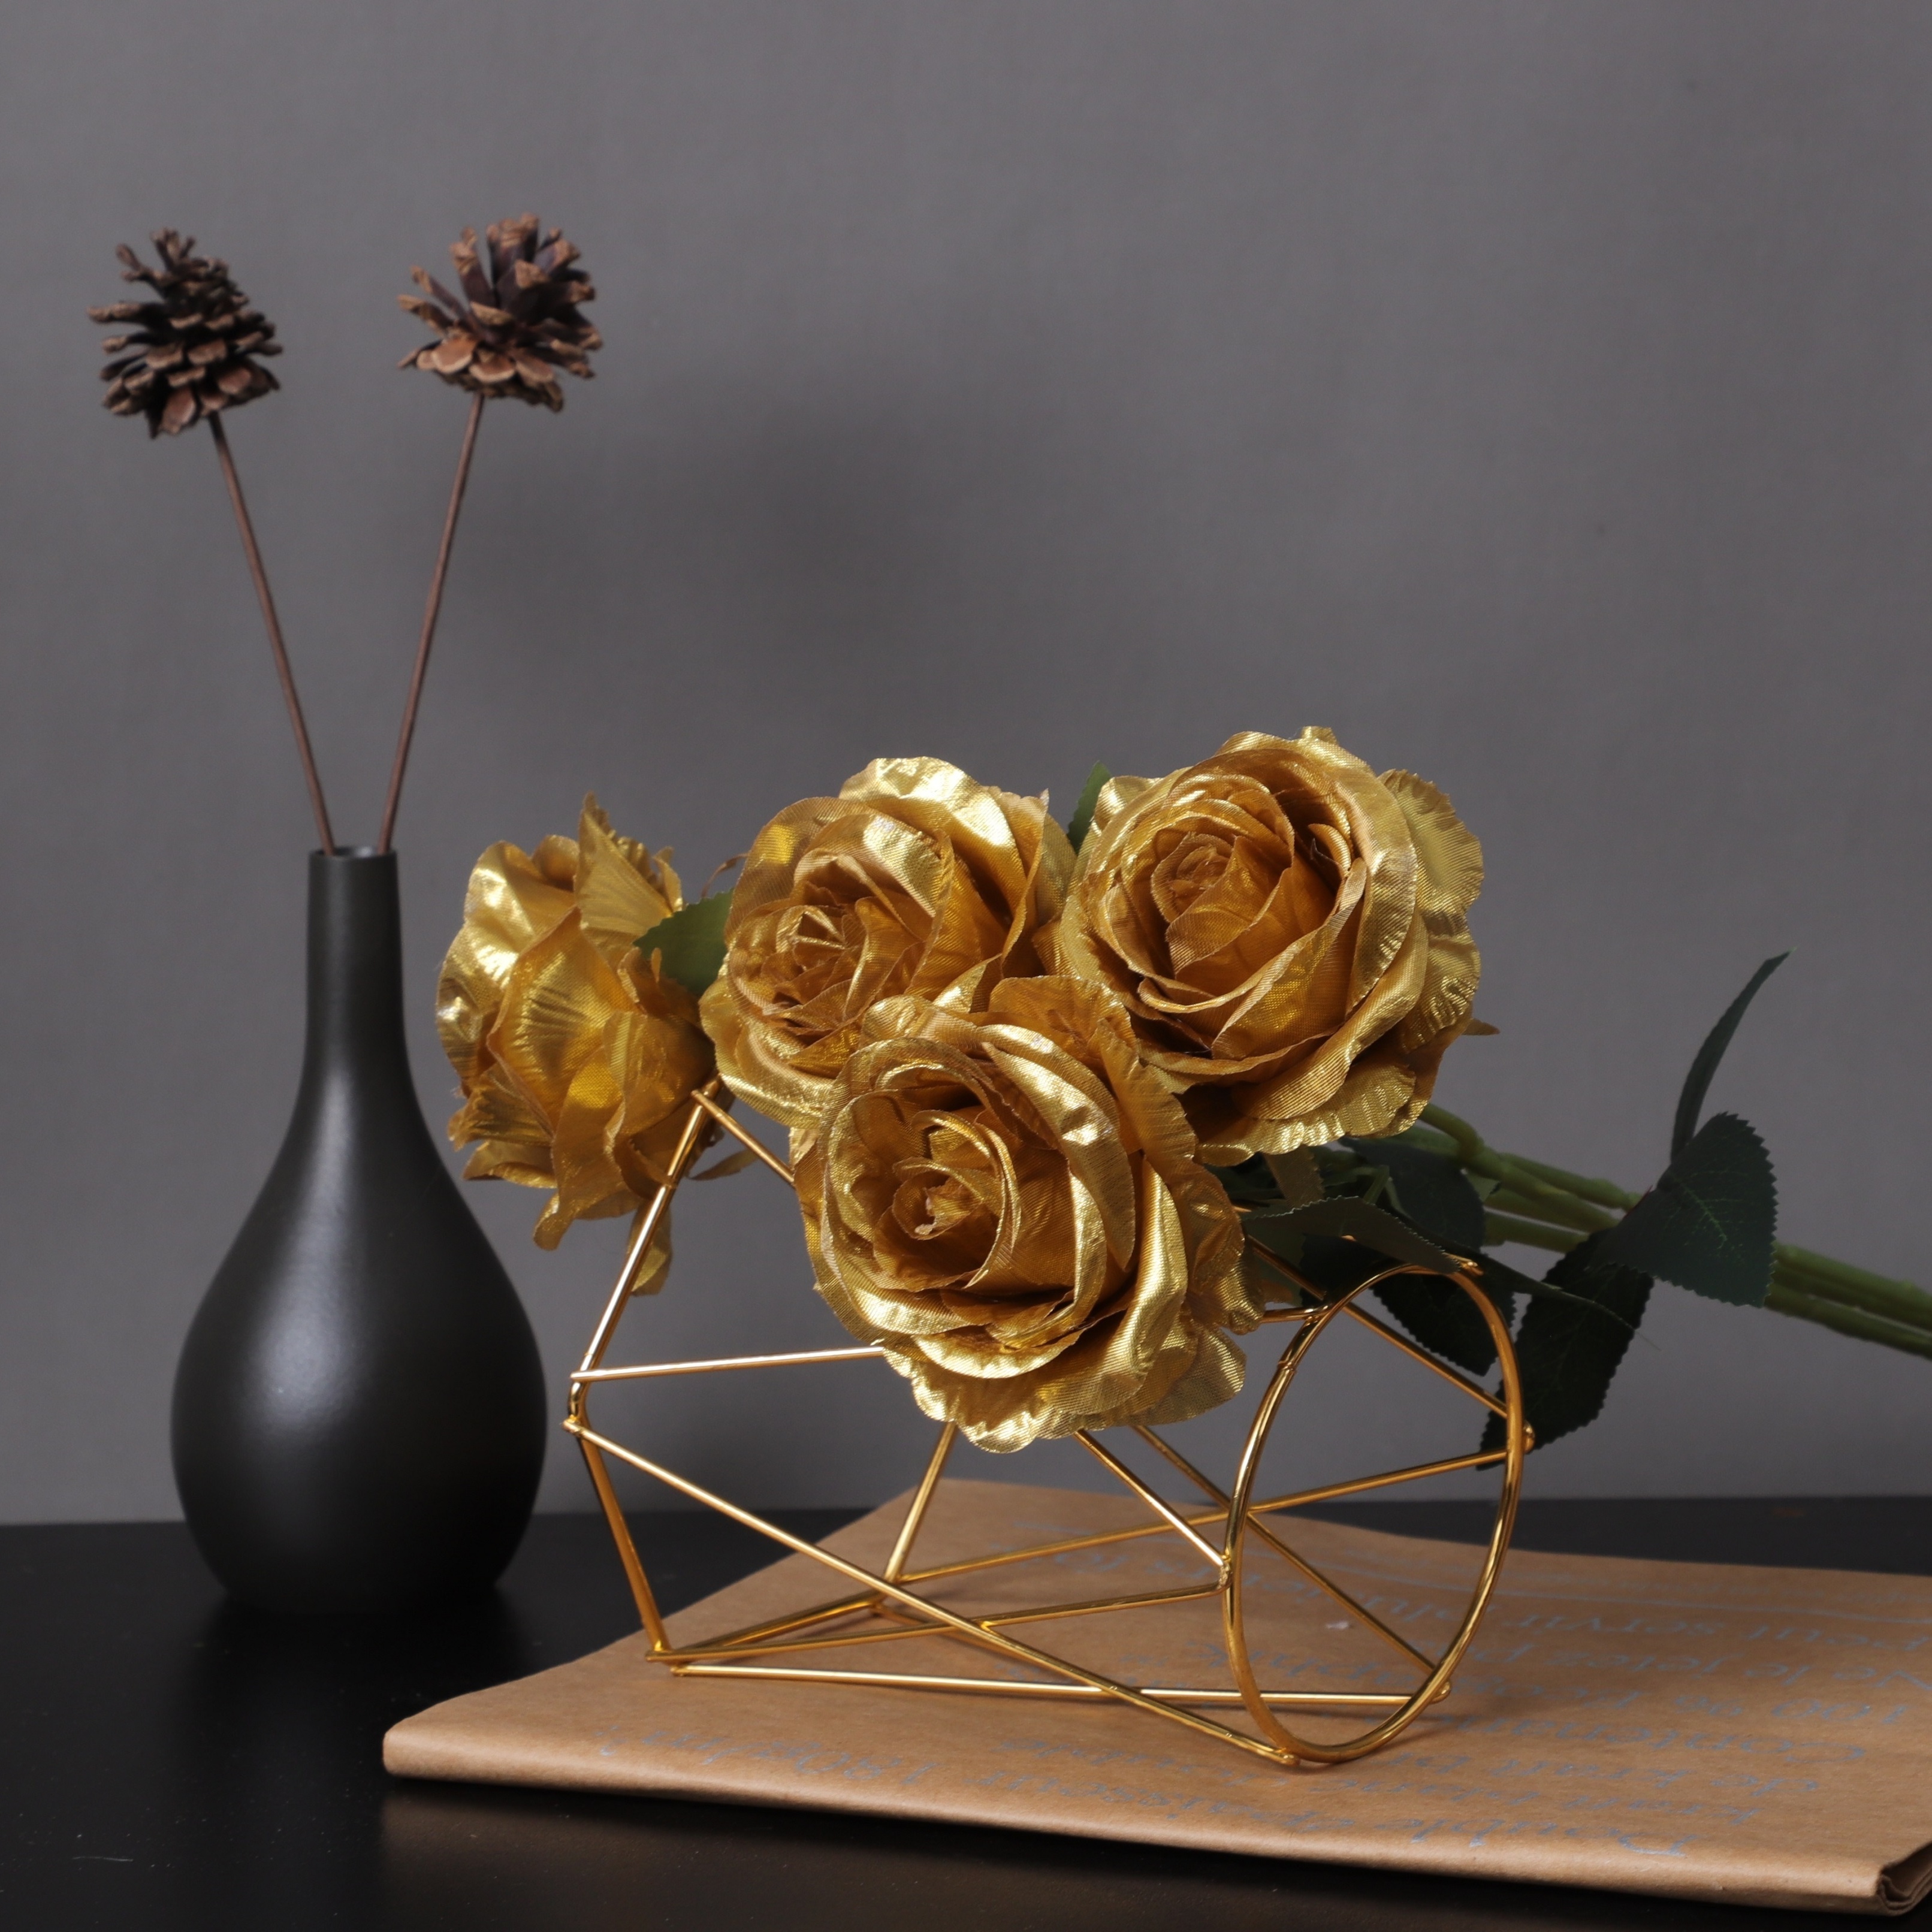 Luyue Artificial Gold Roses Flowers Fake Silk Single Rose with Stem Flower  Gift for Wedding Party Home Decor-10 Pack-Gold